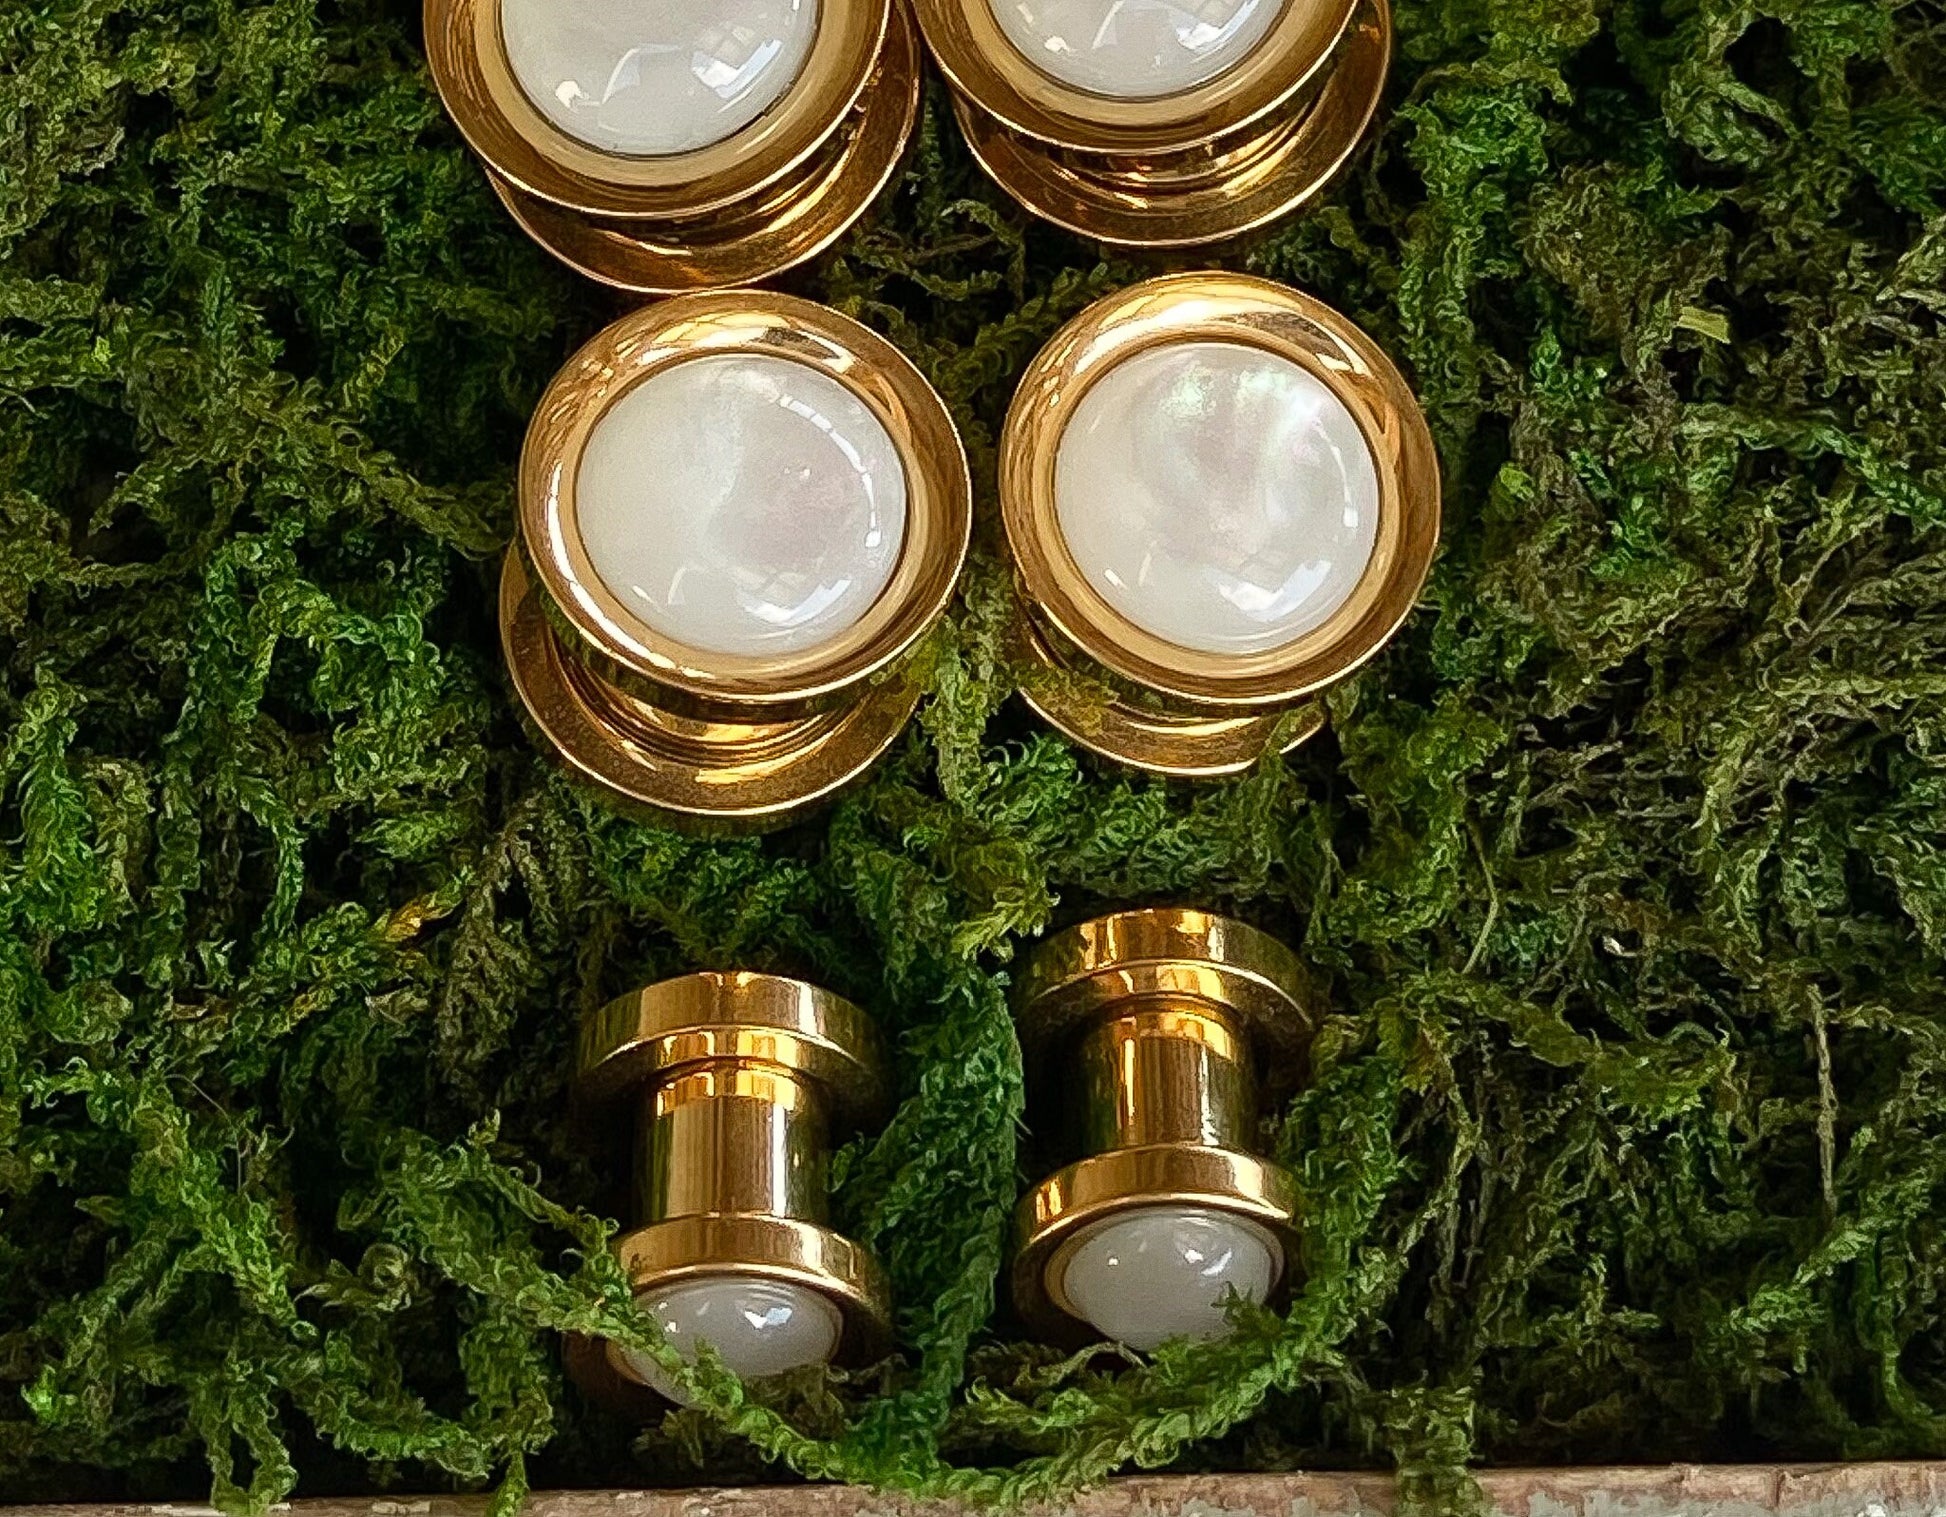 PAIR of Stunning Synthetic White Pearl Gold Screw Fit Tunnels/Plugs - Gauges 2g (6mm) thru 5/8" (16mm) available!